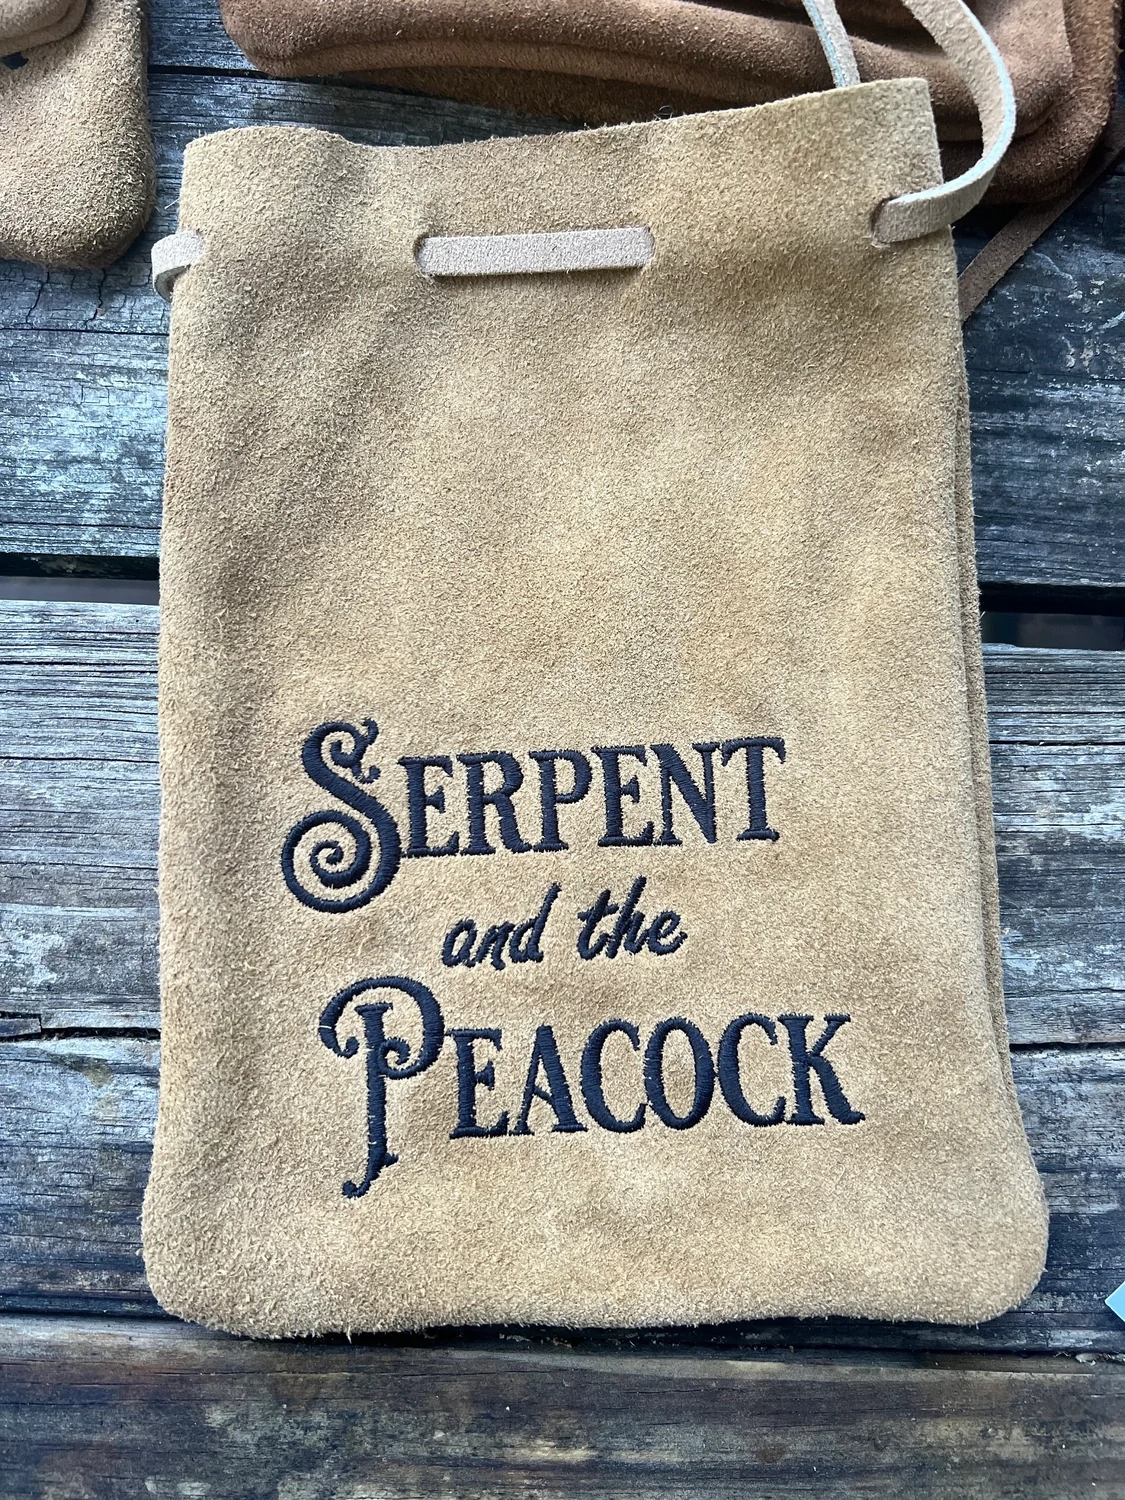 Suede Embroidered Suede Leather Bag 8.5x6 - Serpent and the Peacock